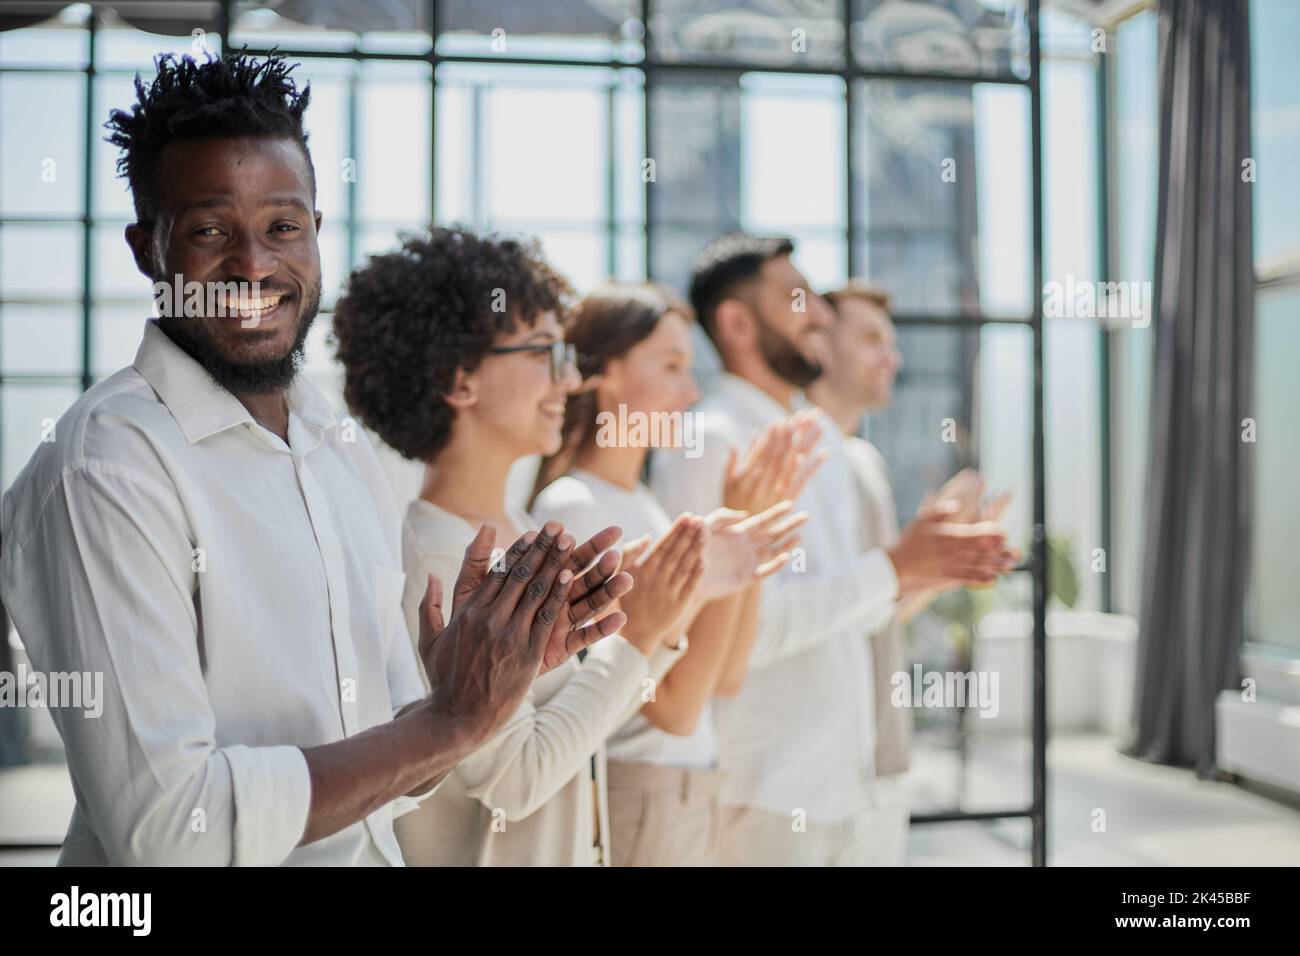 Group of businesspeople sitting in a line and applauding. Stock Photo